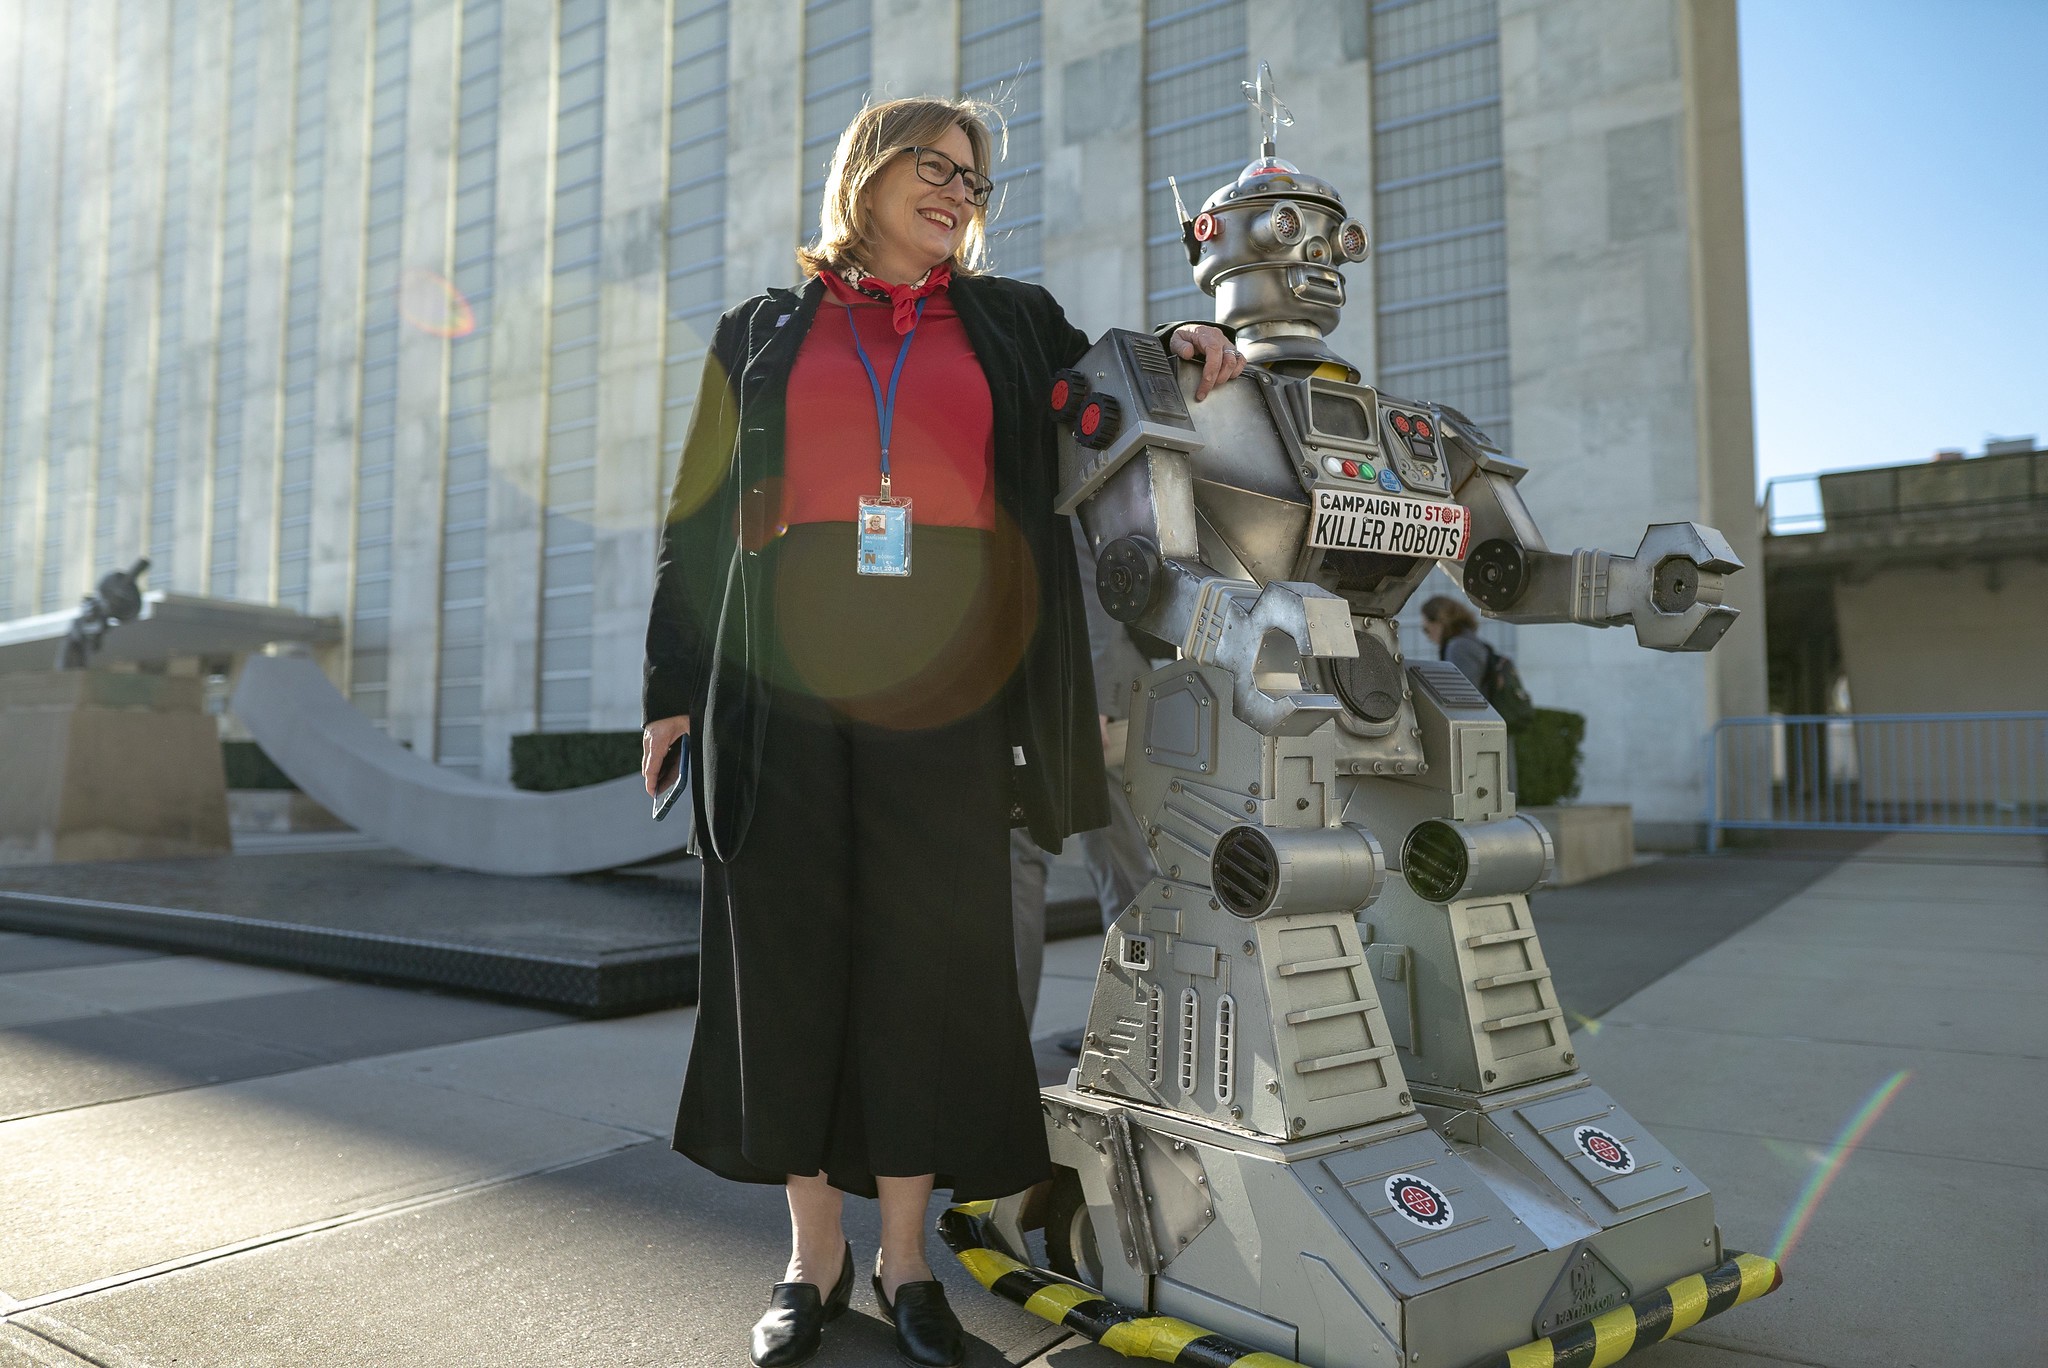 Mary Wareham poses with her hand on the Campaign robot’s shoulder in front of the UN building with the sun behind them.